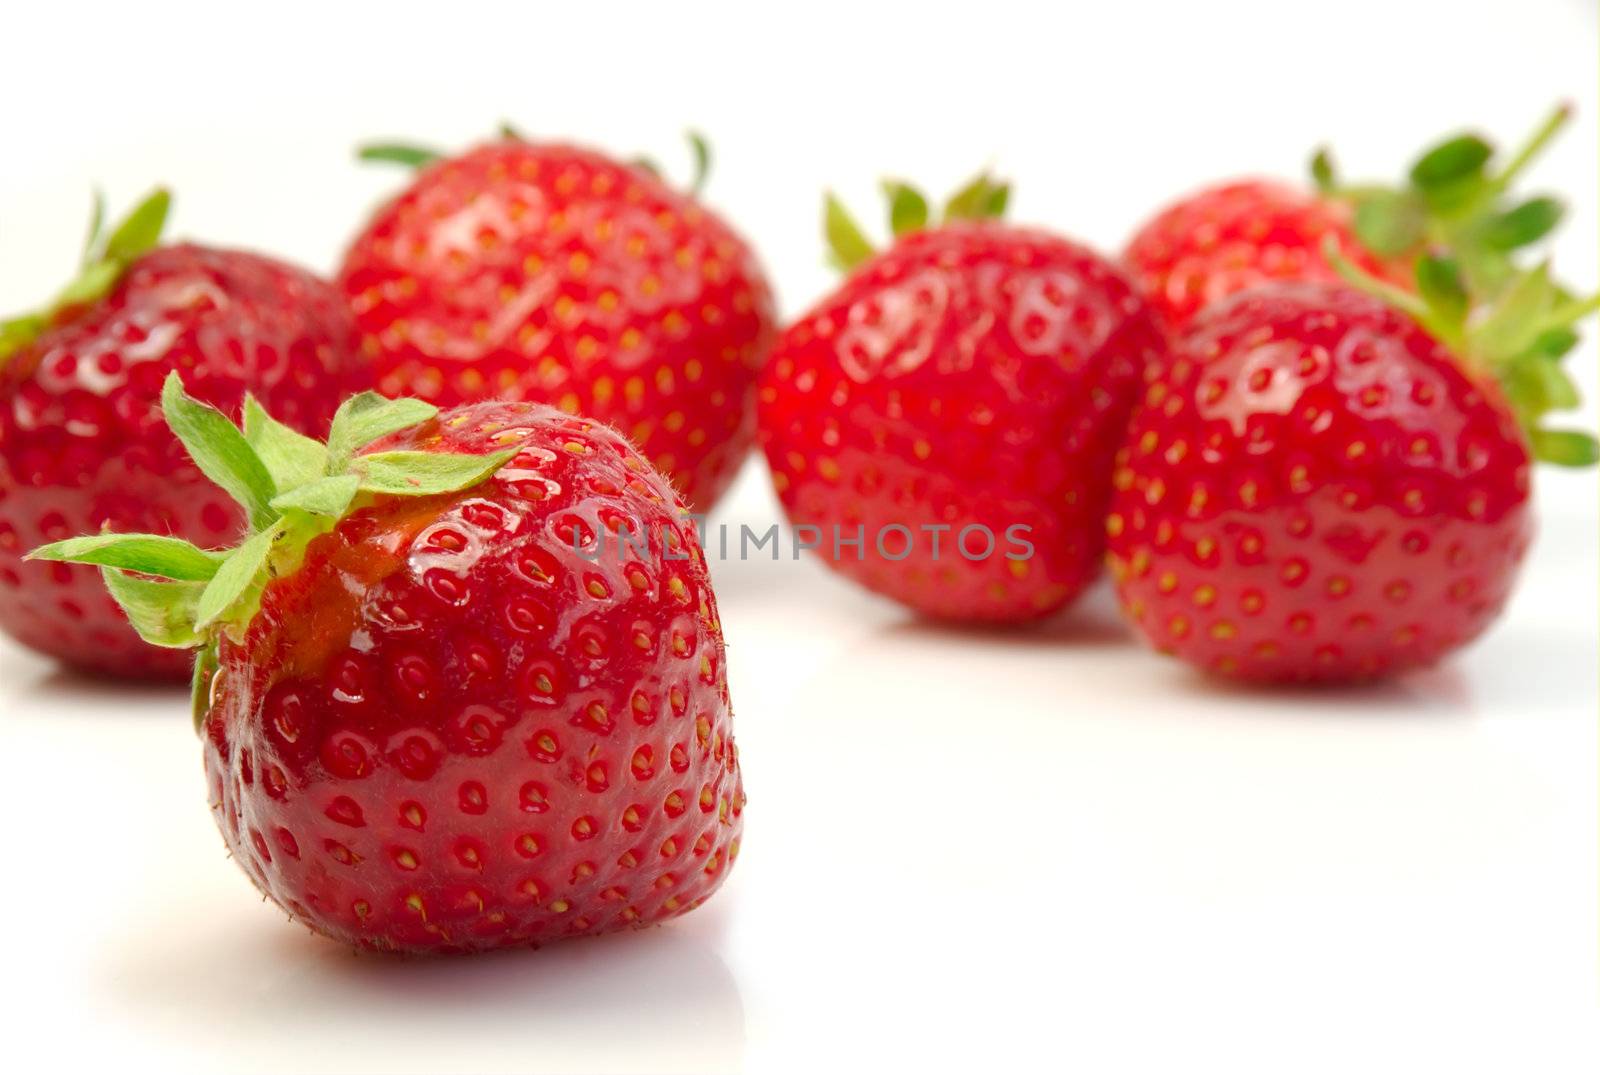 Shot of a pile of fresh strawberries